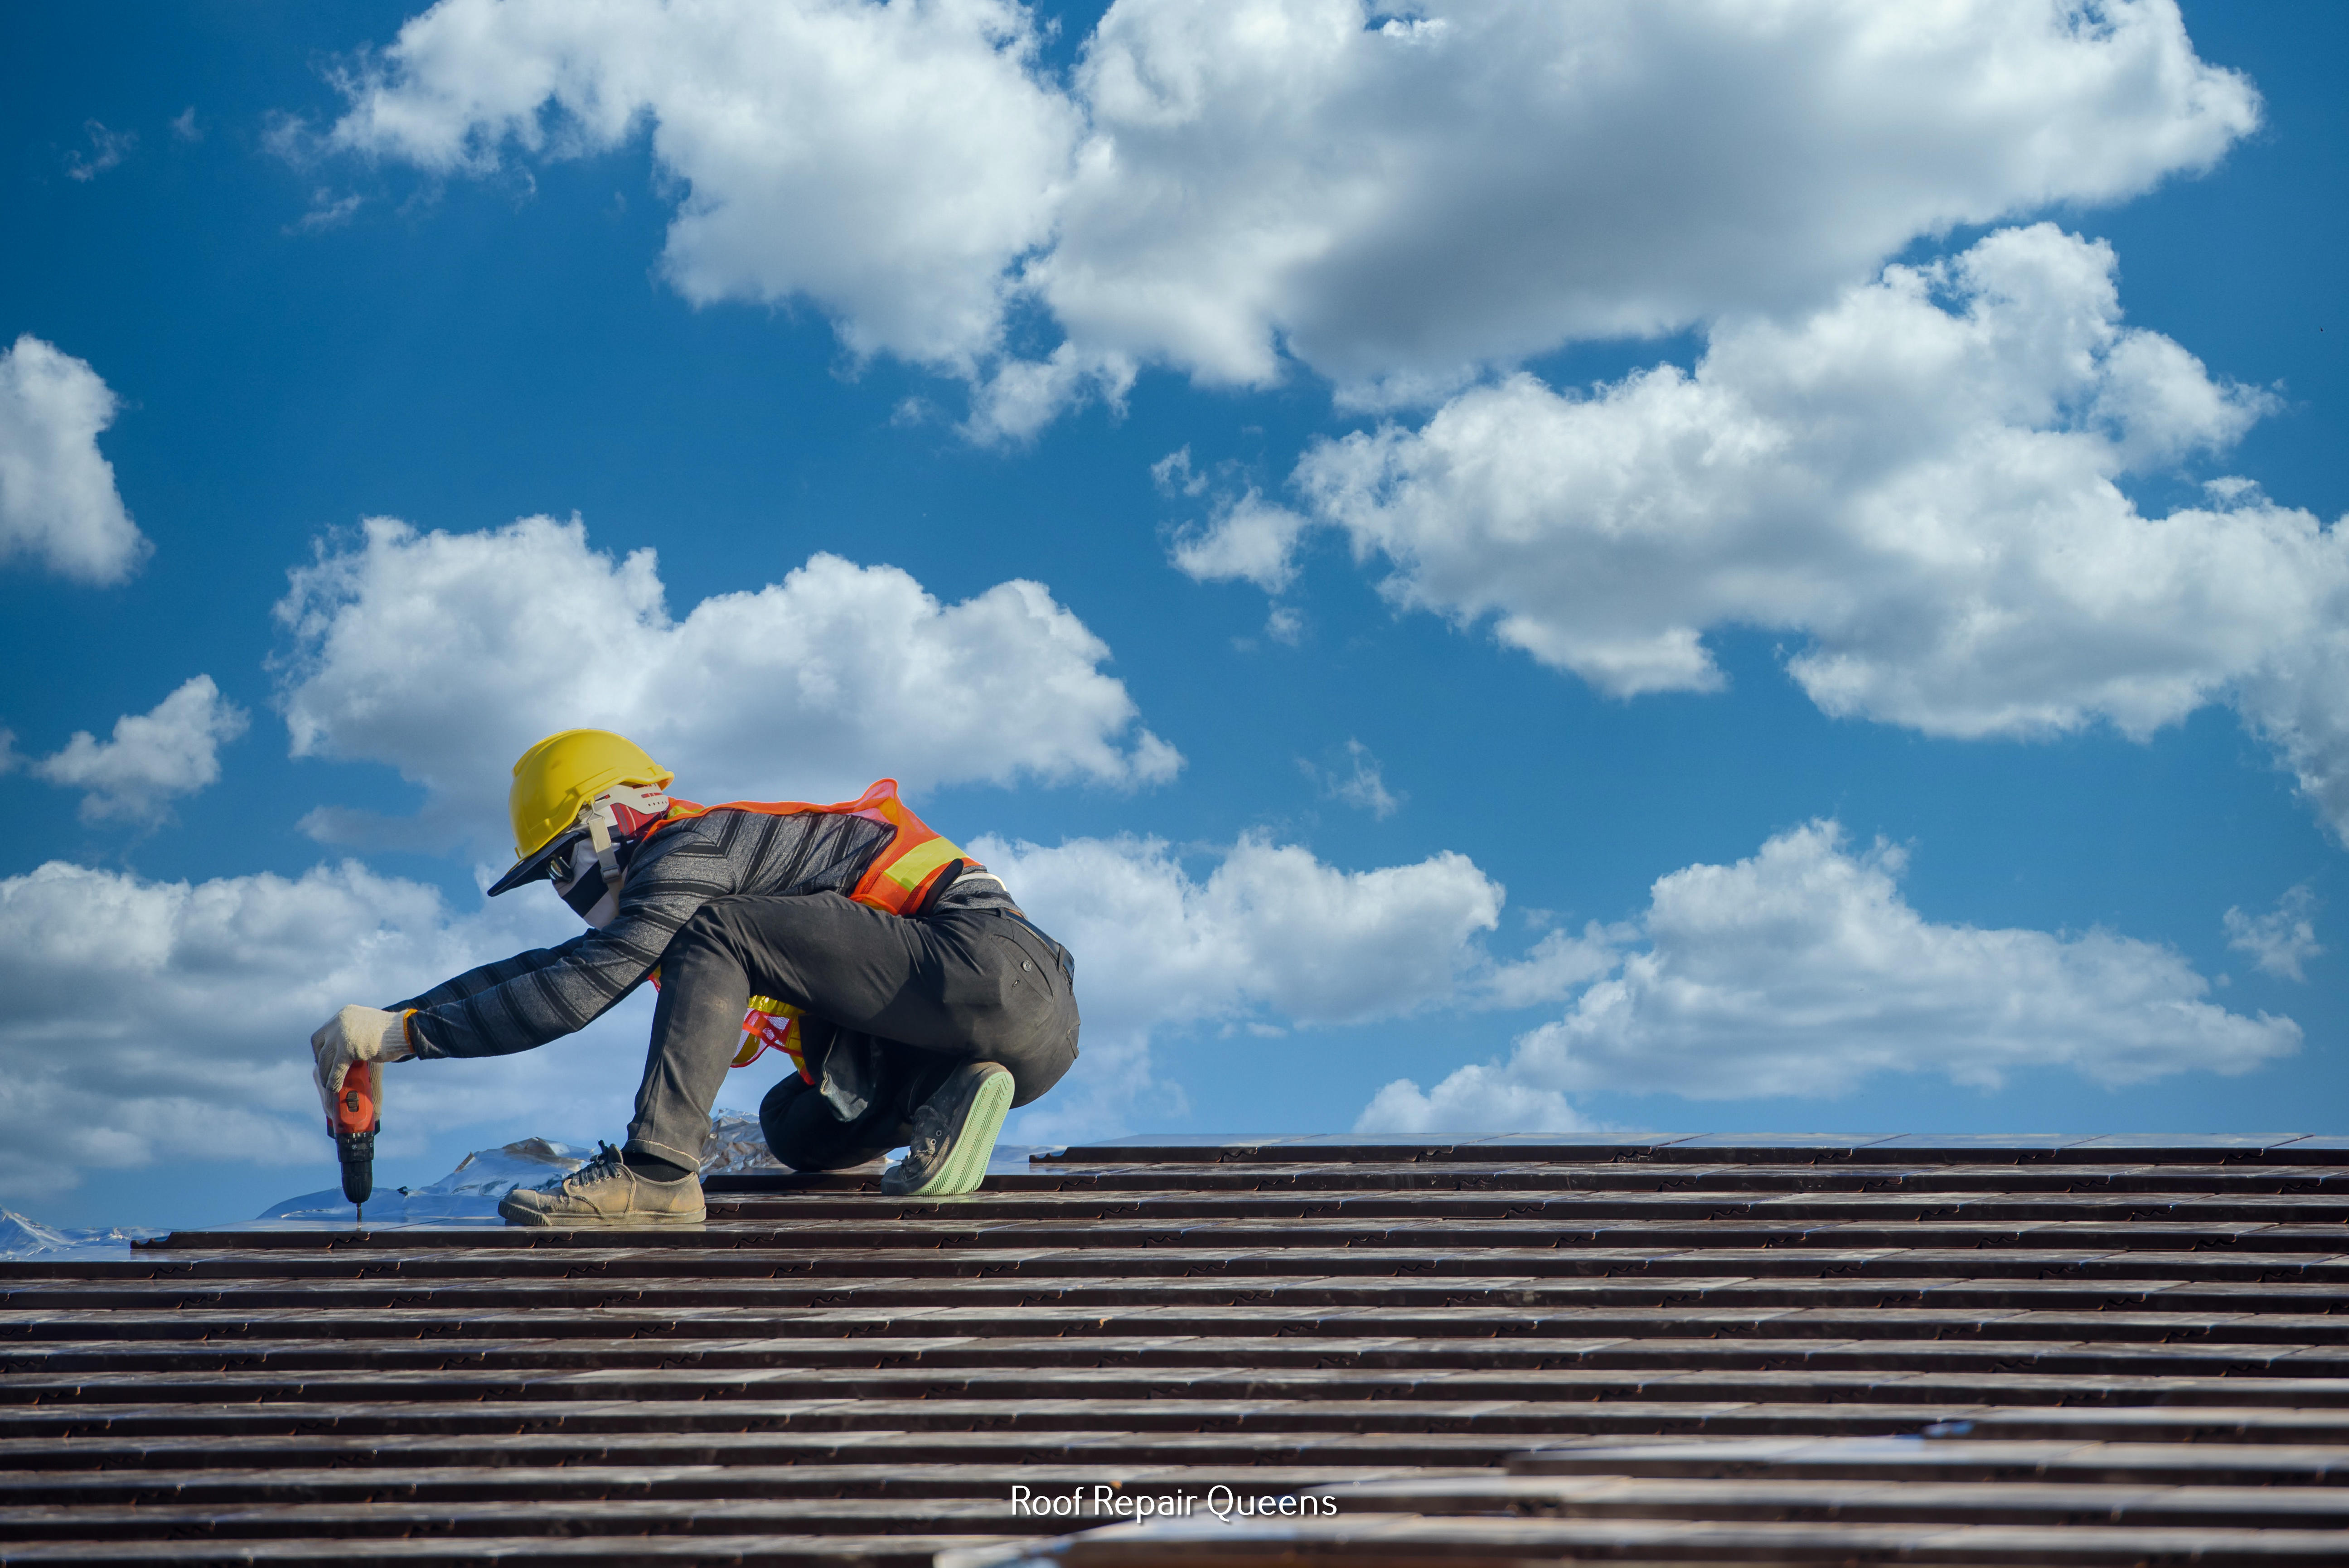 Skyward Roofing - Queens Highlights the Benefits of Roof Replacement 